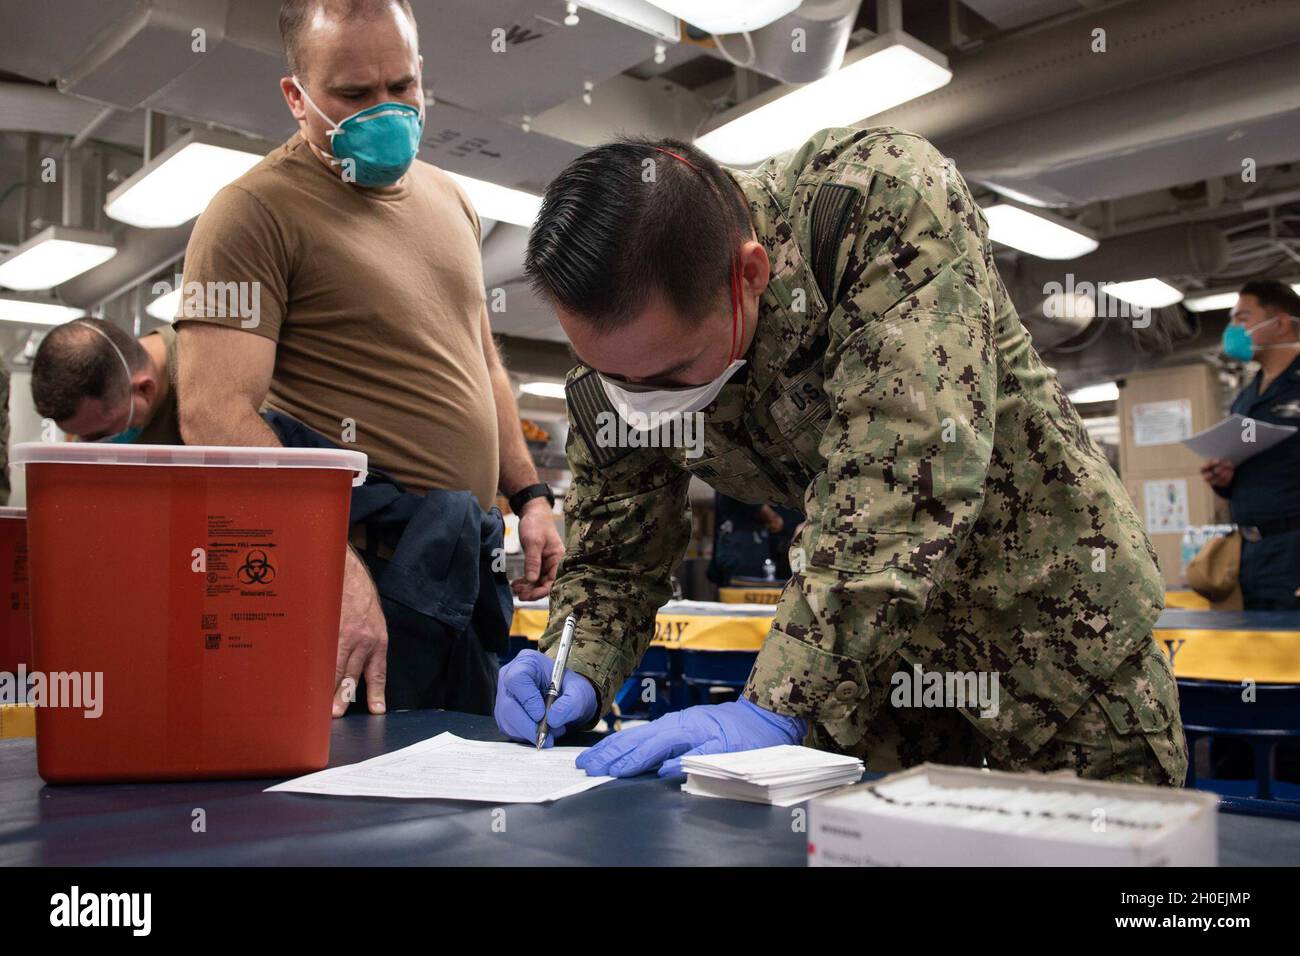 210213-N-QD512-1015 NORFOLK, Va. (Feb. 13, 2020) Hospital Corpsman 1st Class Thai Dinh, from El Monte, California, right, prepares paperwork before administering a COVID-19 vaccine to Cmdr. Thomas McCandless, commanding officer of the Arleigh-Burke class guided-missile destroyer USS Mitscher (DDG 57). Mitscher is currently pier side conducting routine maintenance. Stock Photo